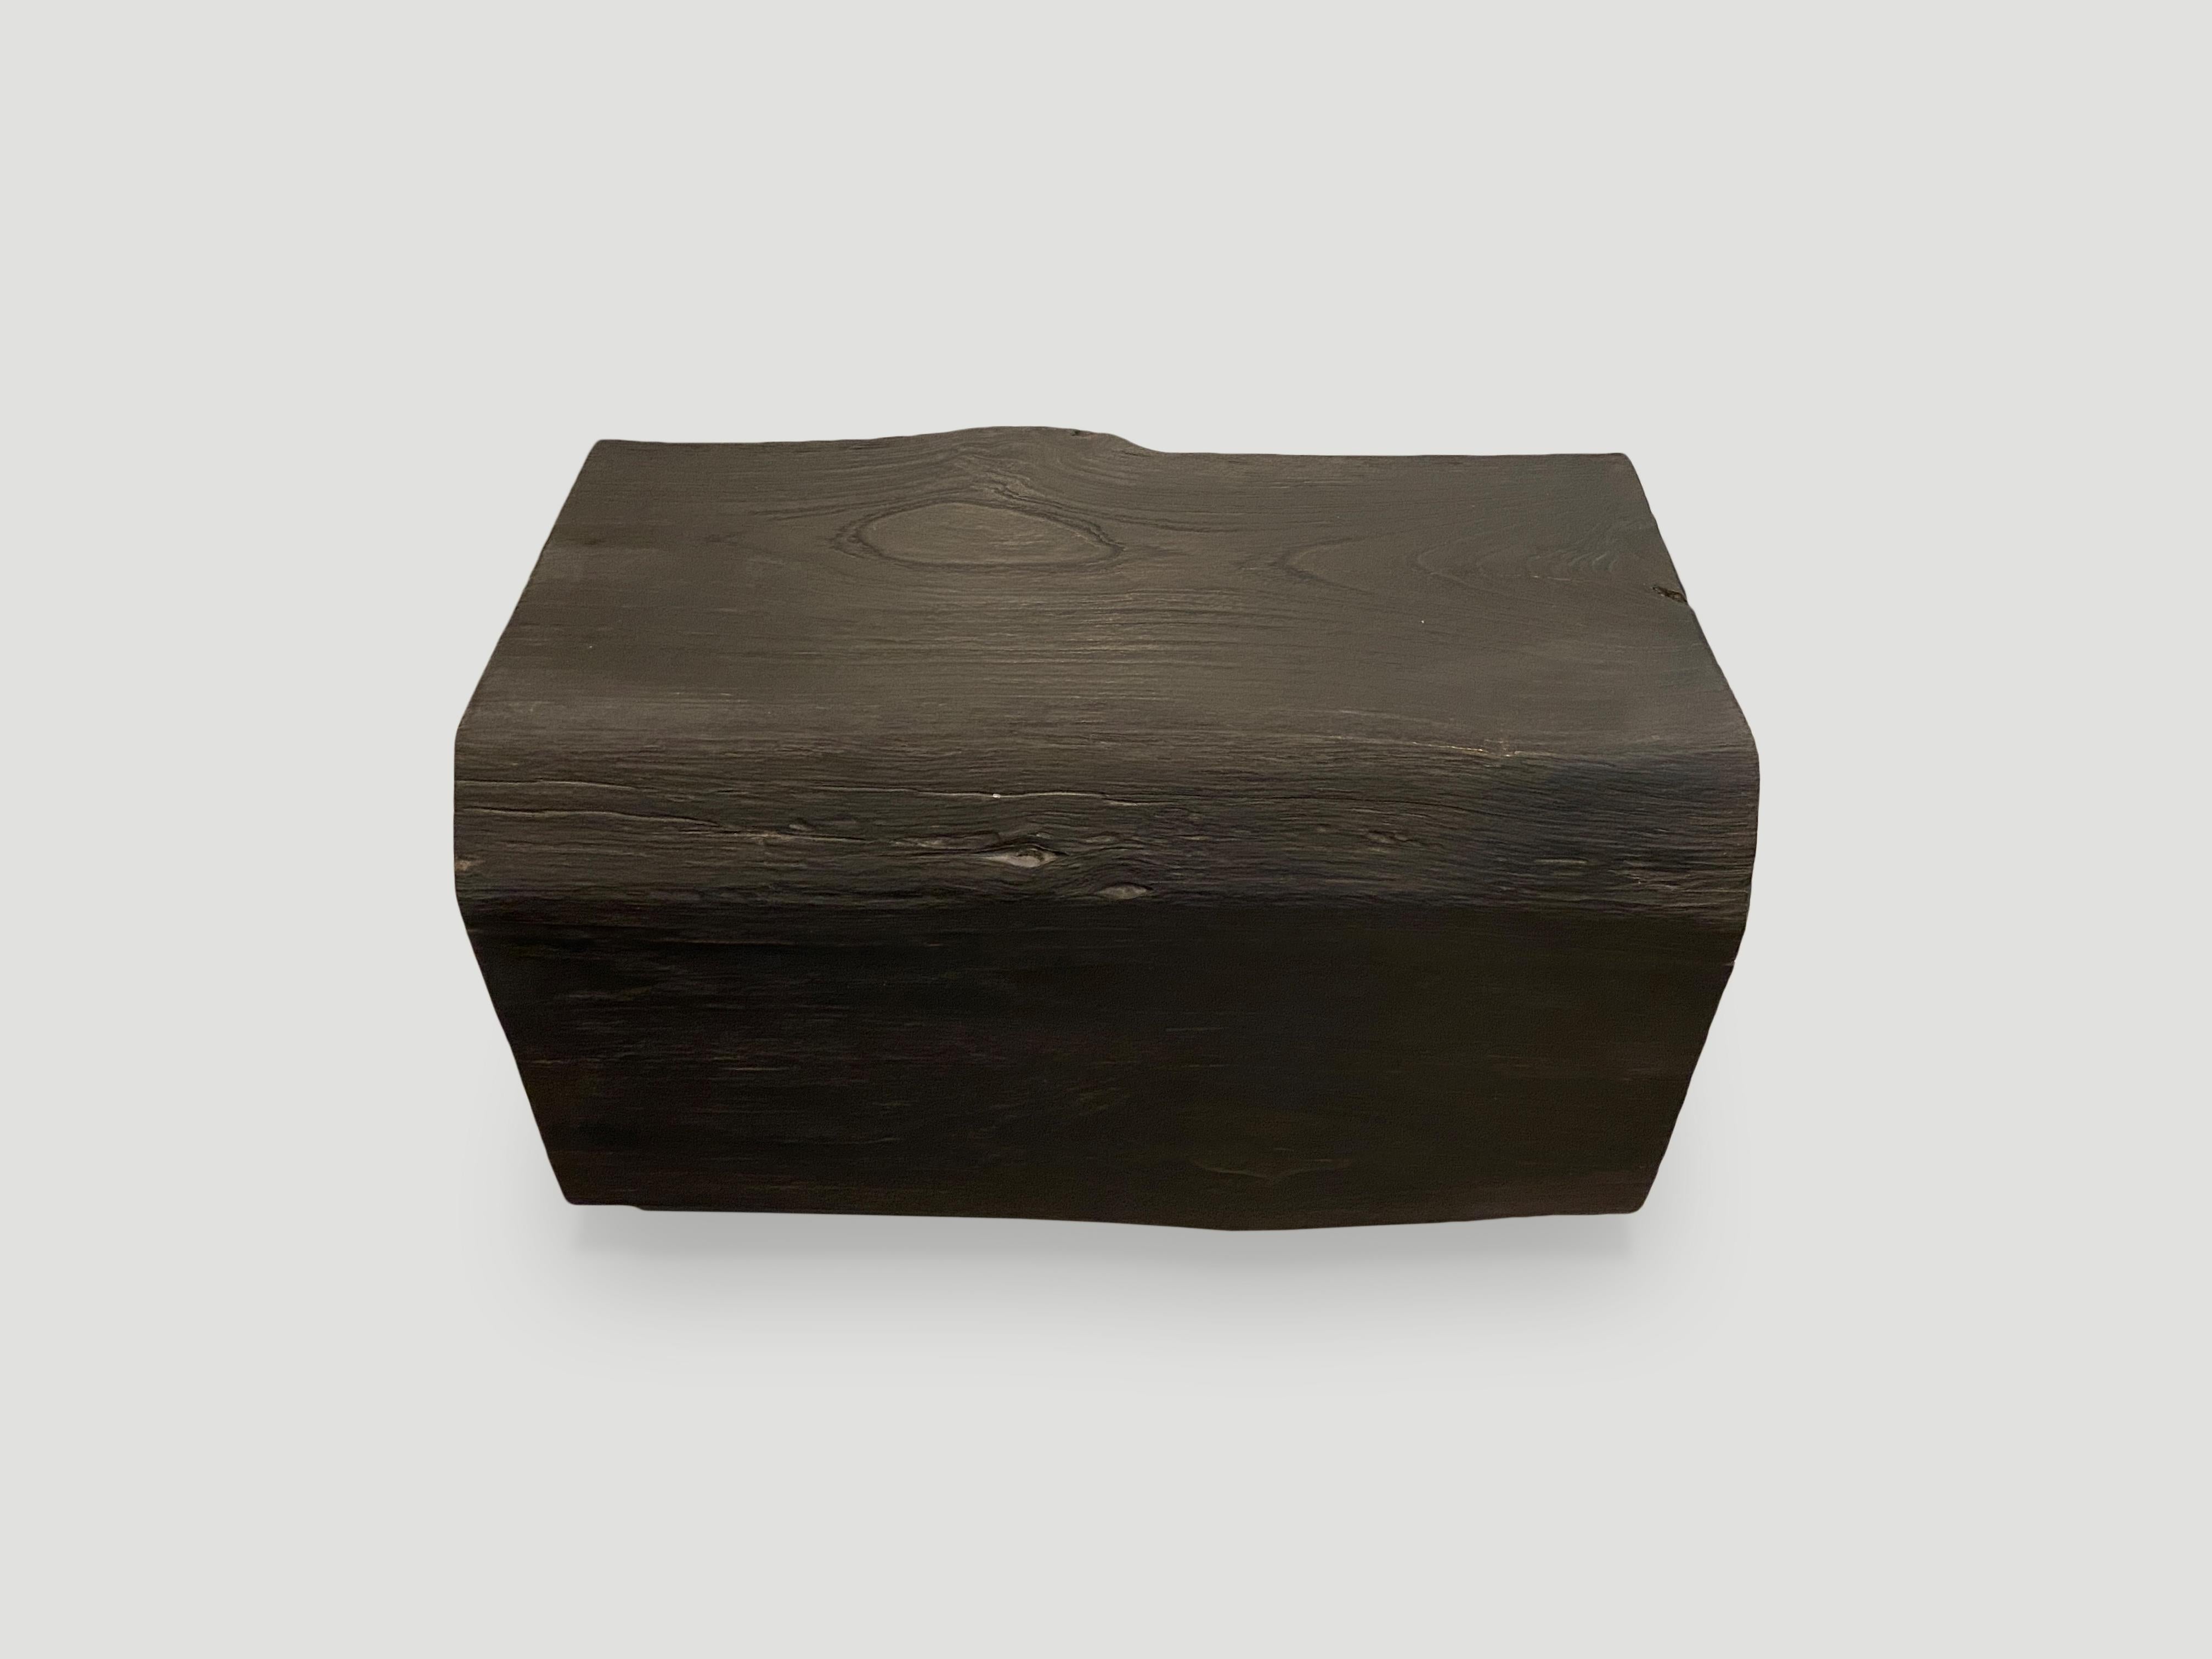 Reclaimed solid teak log bench or coffee table. Charred, sanded and sealed revealing the beautiful wood grain.

The Triple Burnt Collection represents a unique line of modern furniture made from solid organic wood. Burnt three times to produce a